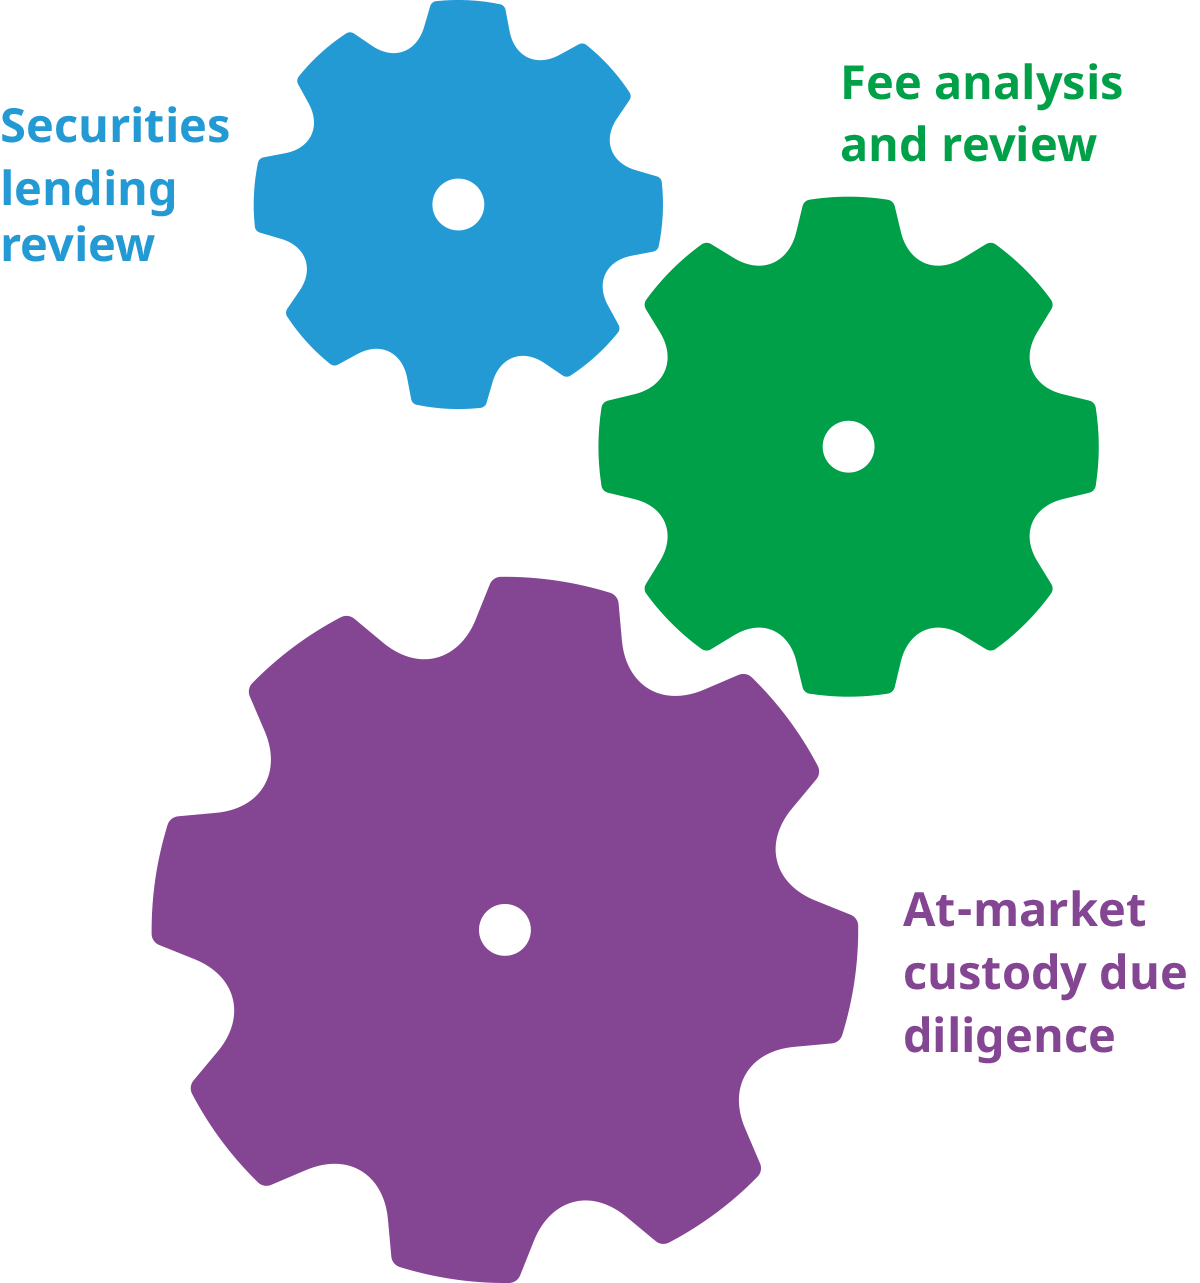 Securities lending review, fee analysis and review, at-market custody due diligence